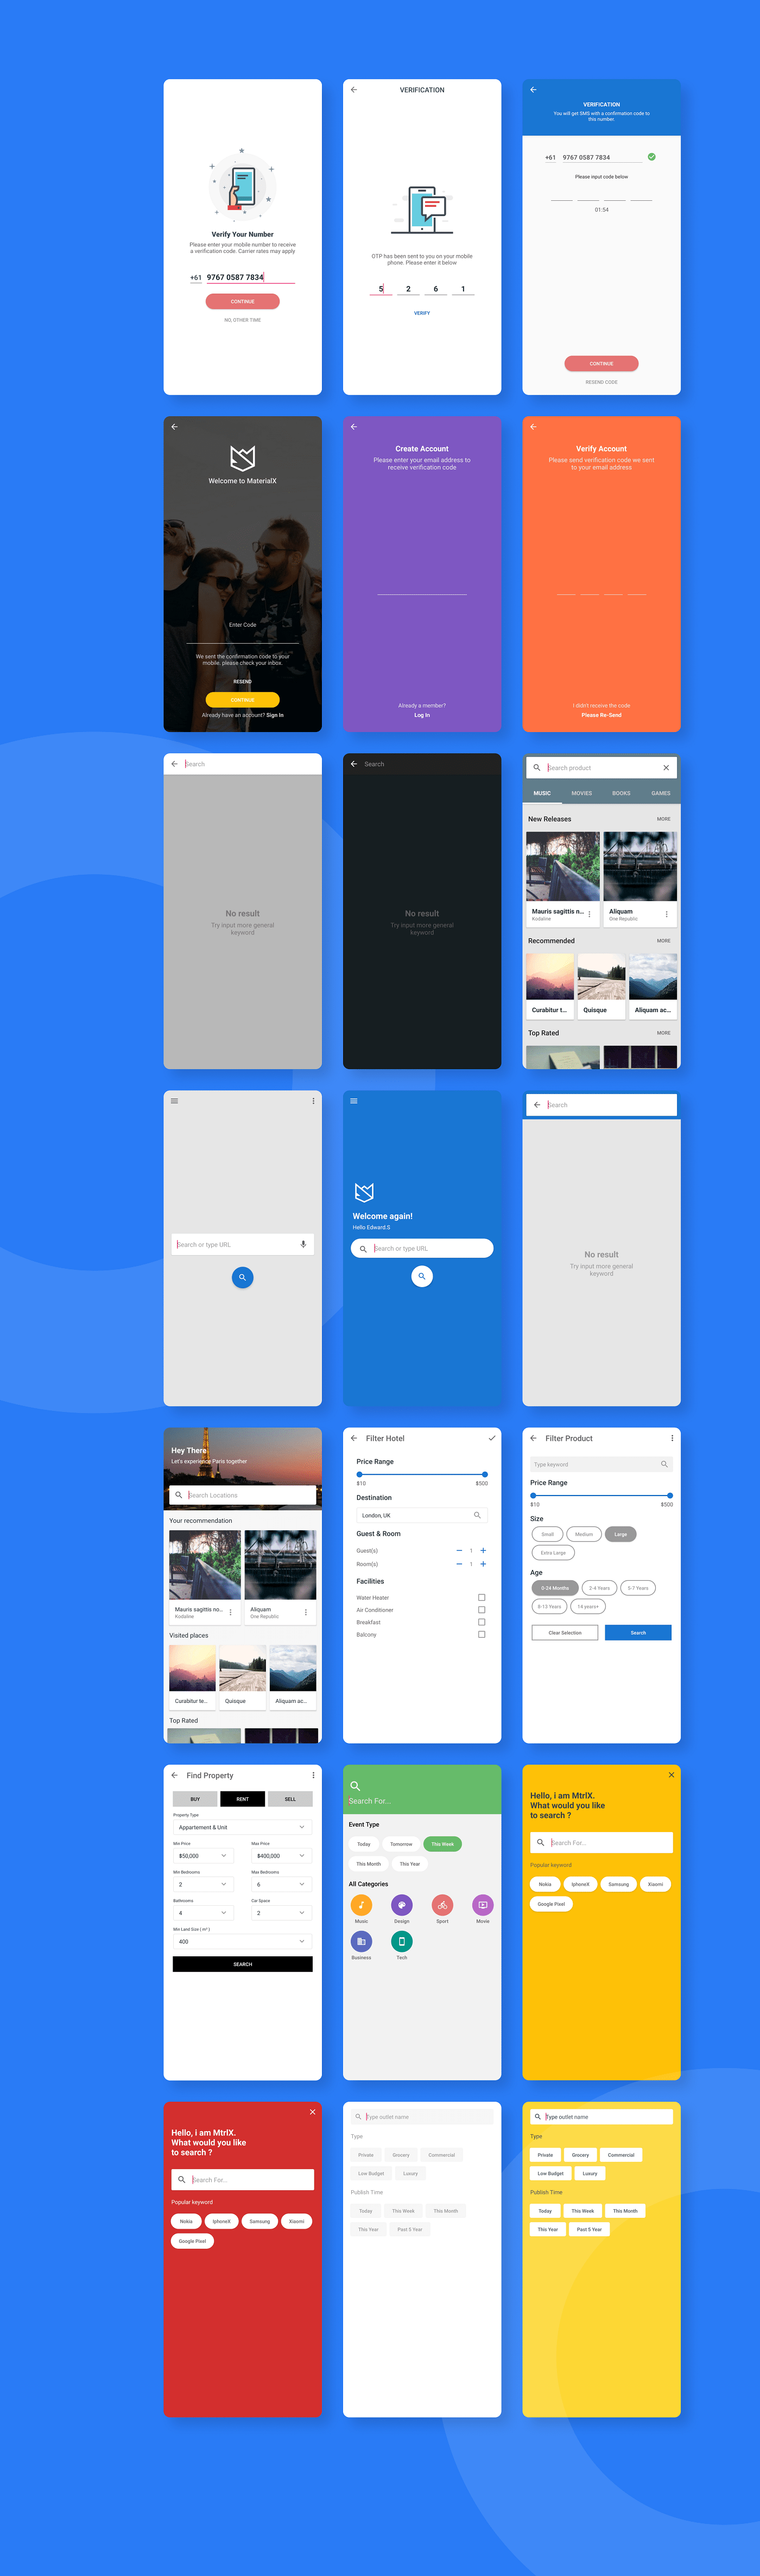 MaterialX - Android Material Design UI Components 2.7 - 30